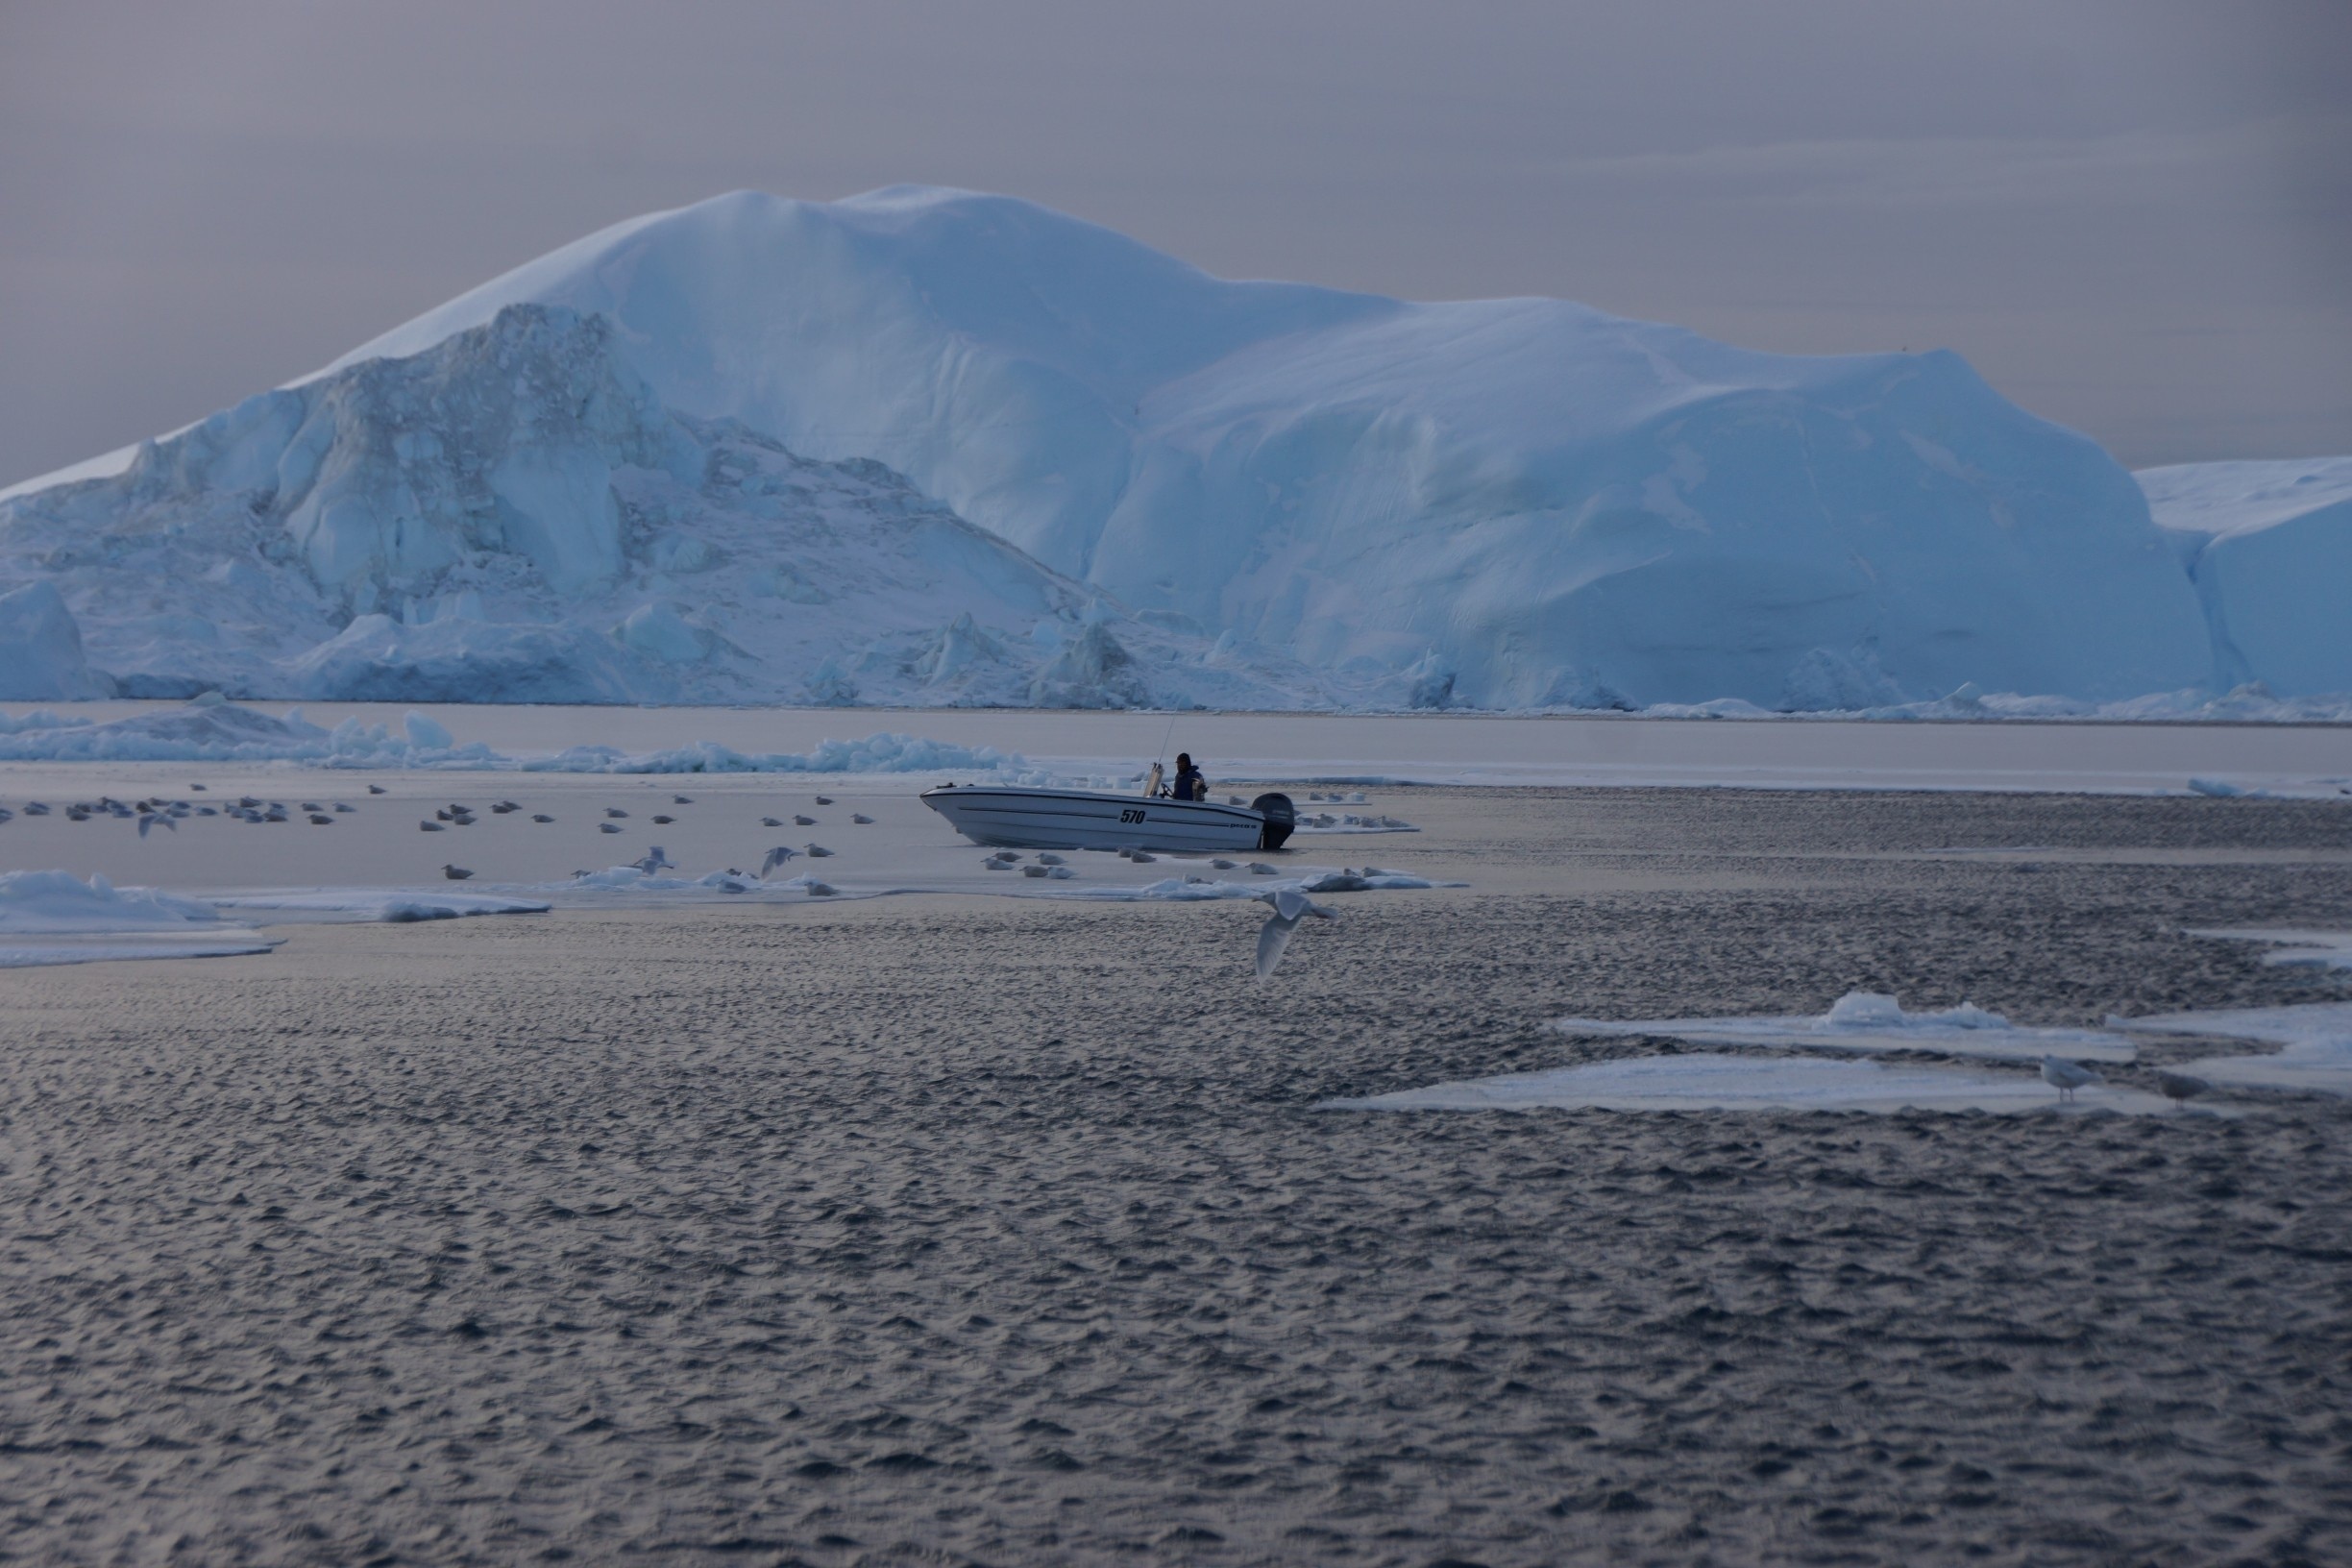 Locals out fishing.  Their boats were markedly smaller than our boat, which meant they could maneuver through the sheet ice more easily.